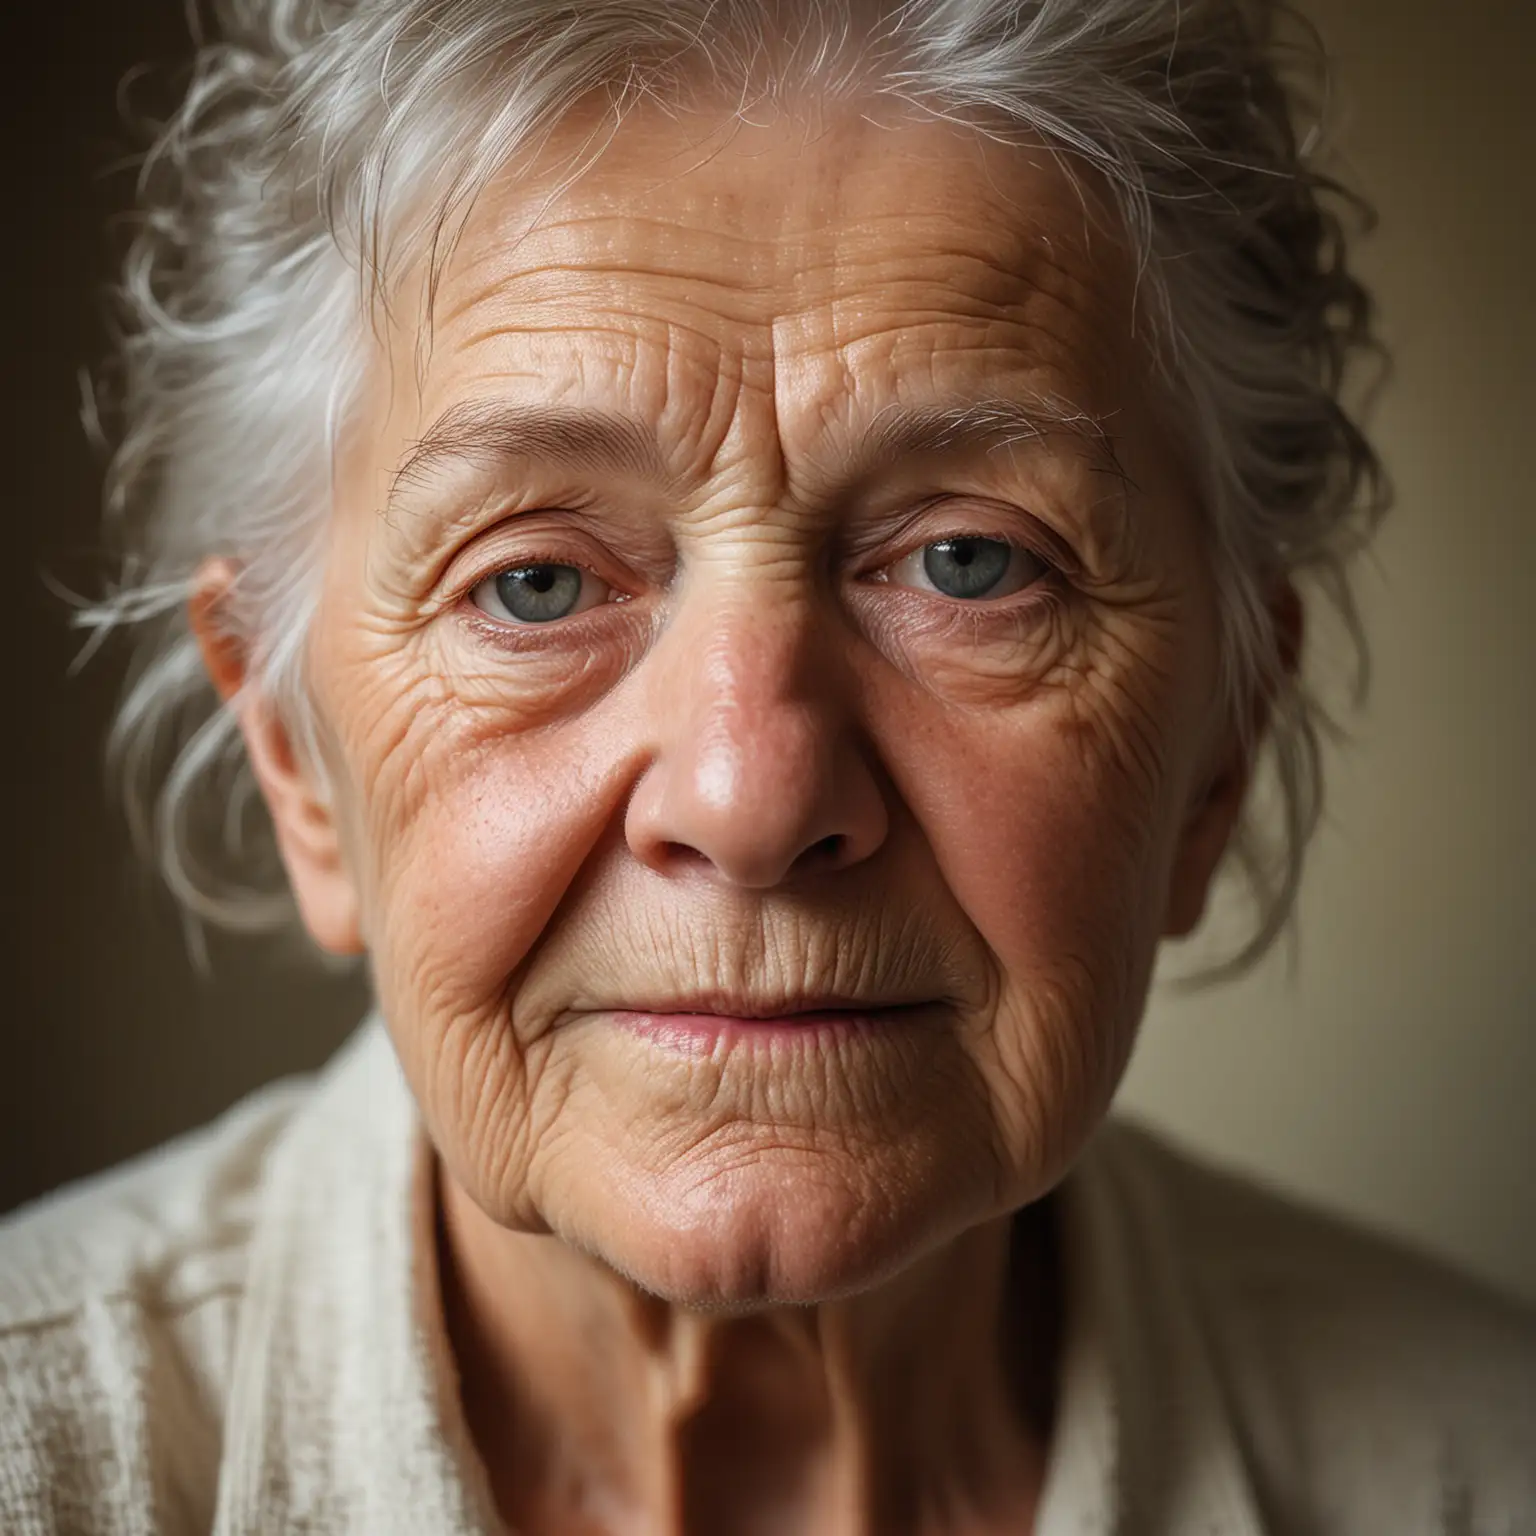 Capturing the Soul Natural Lighting Portraits of Elderly Individuals